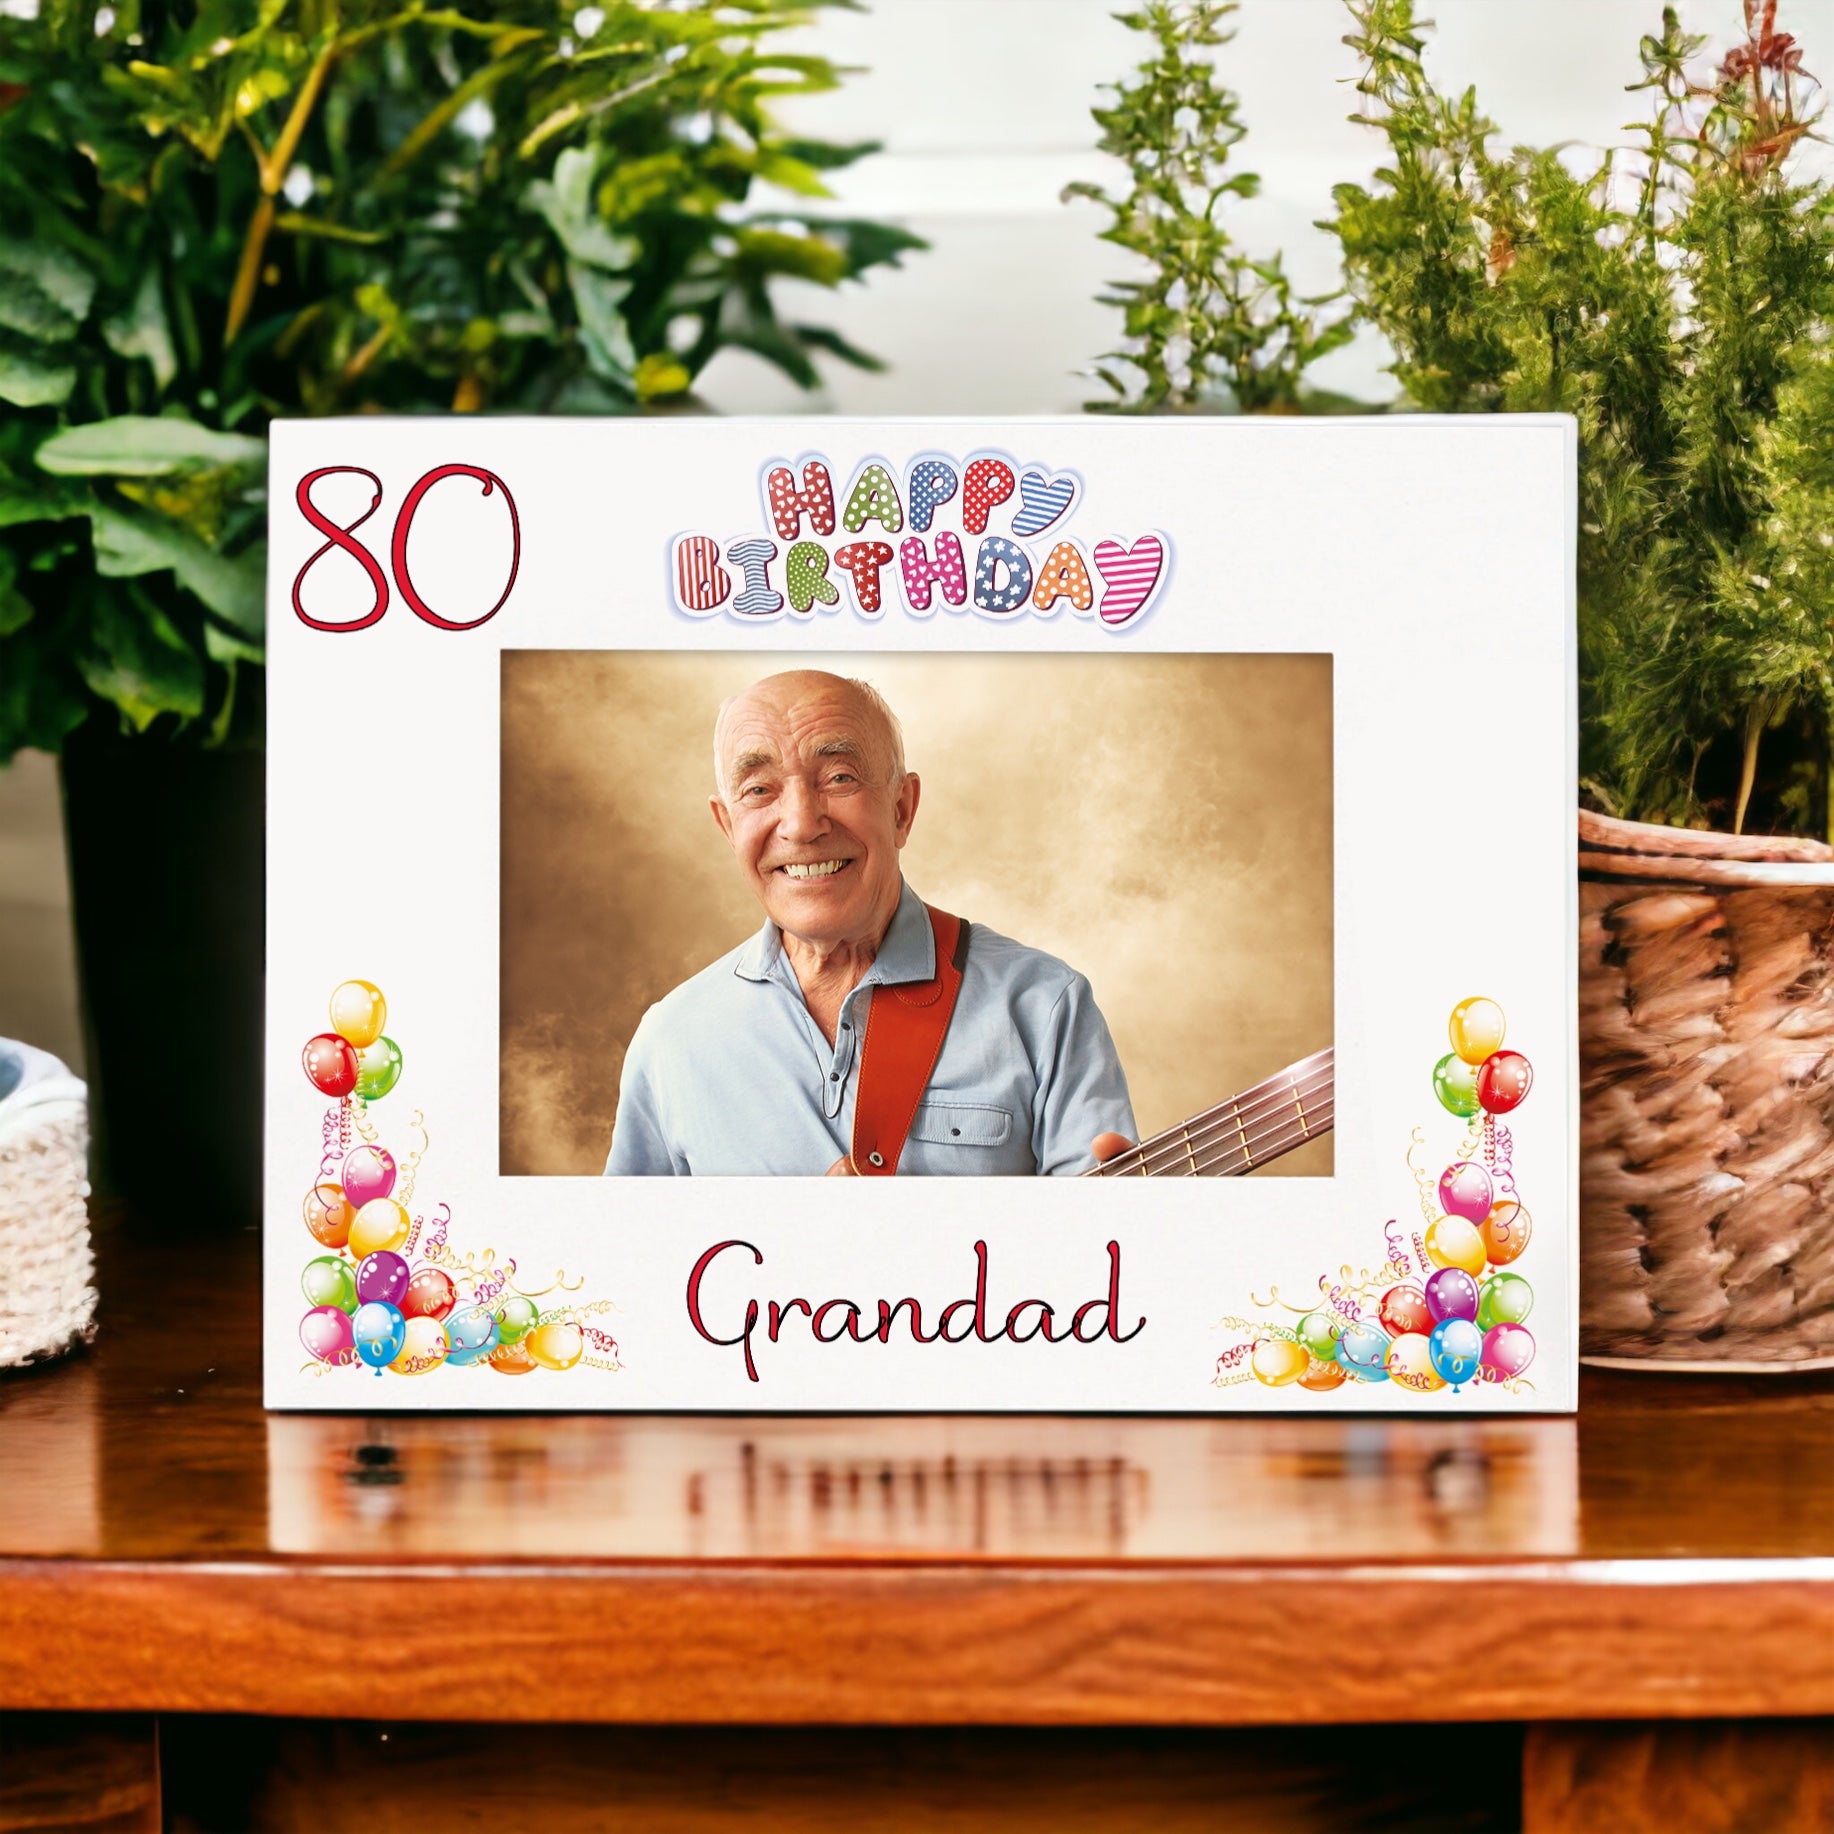 Copy of Personalised Colourful 80th Birthday Photo Frame Landscape With Name